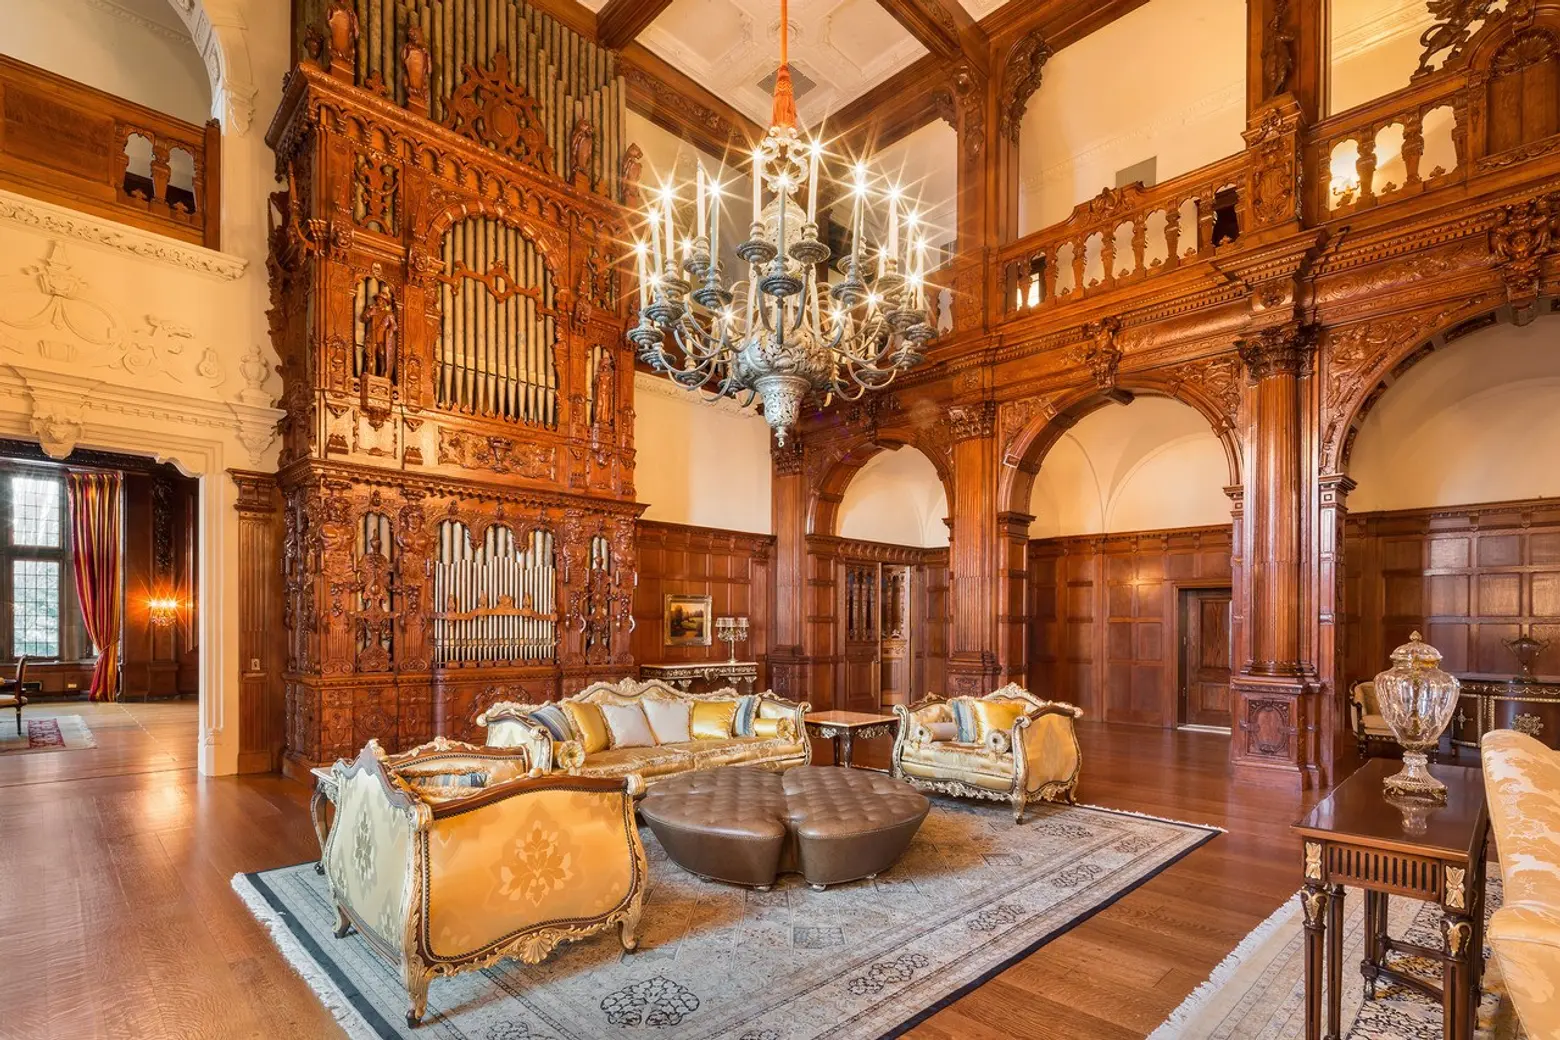 100-year-old New Jersey castle with 58 rooms hits the market for $48M